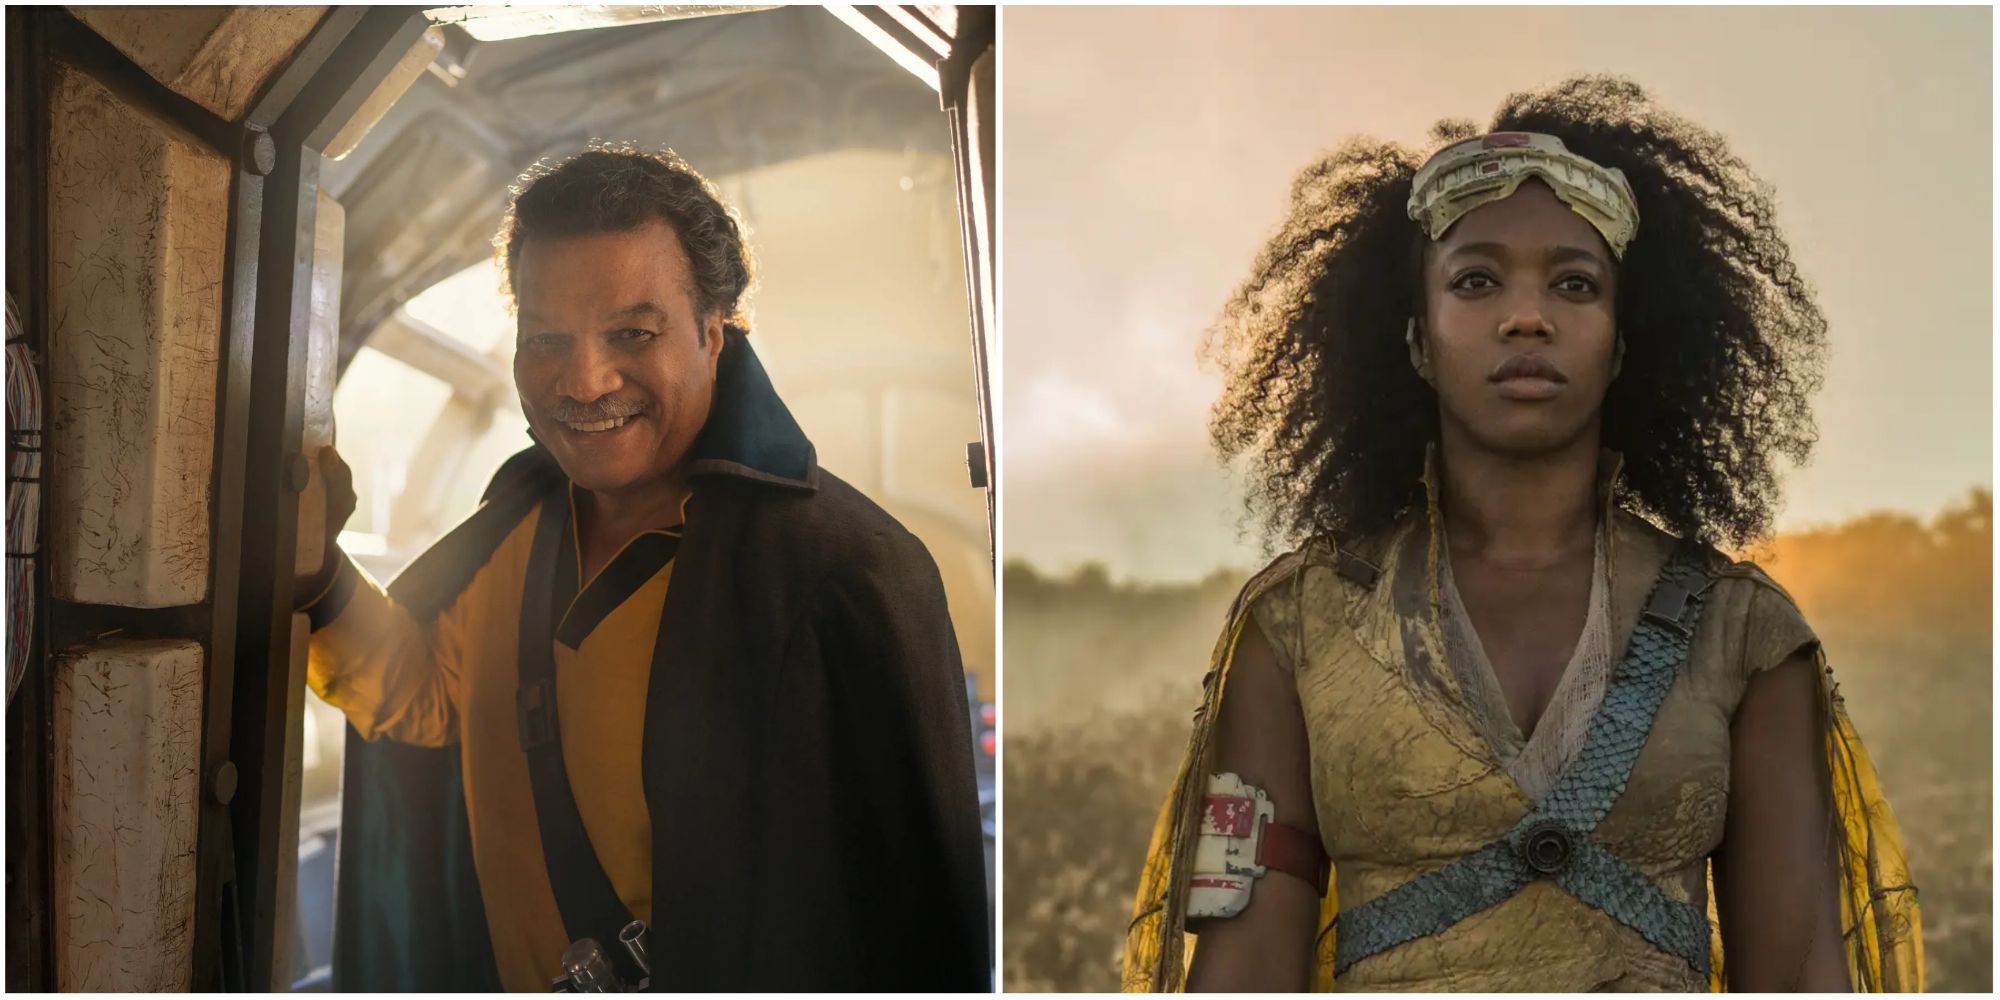 Lando and Jannah in Star Wars: The Rise of Skywalker